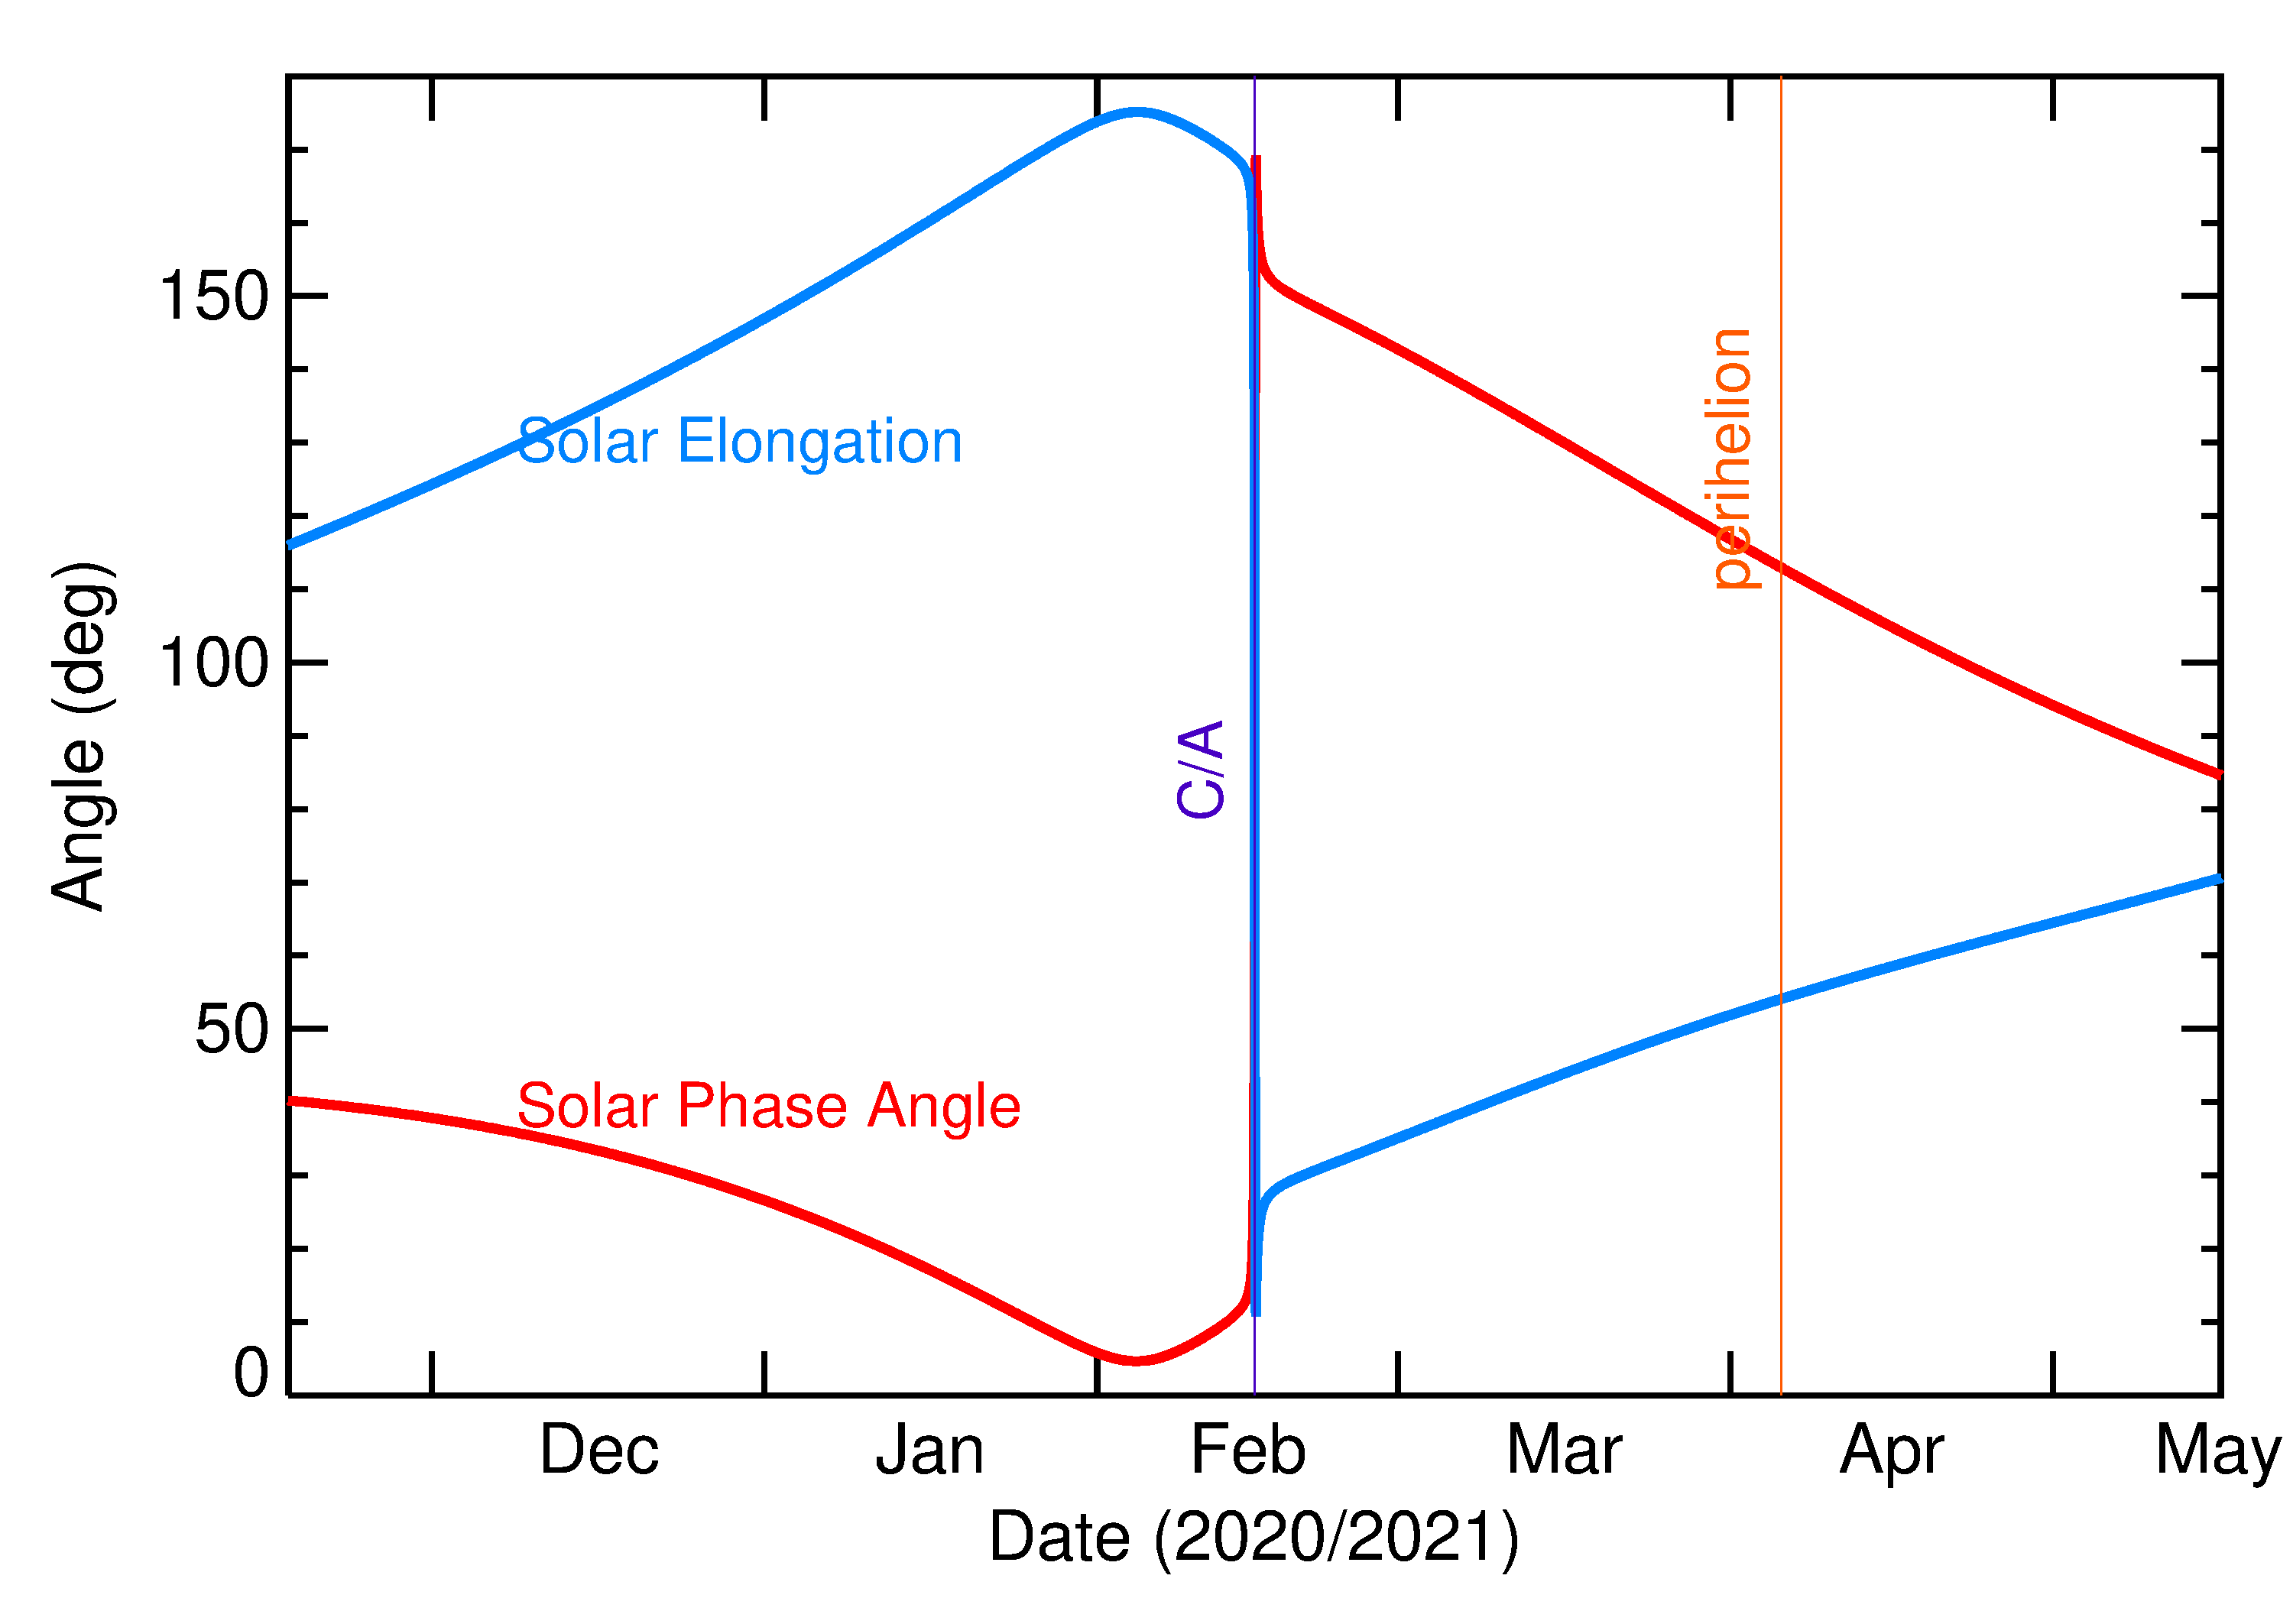 Solar Elongation and Solar Phase Angle of 2021 CW7 in the months around closest approach